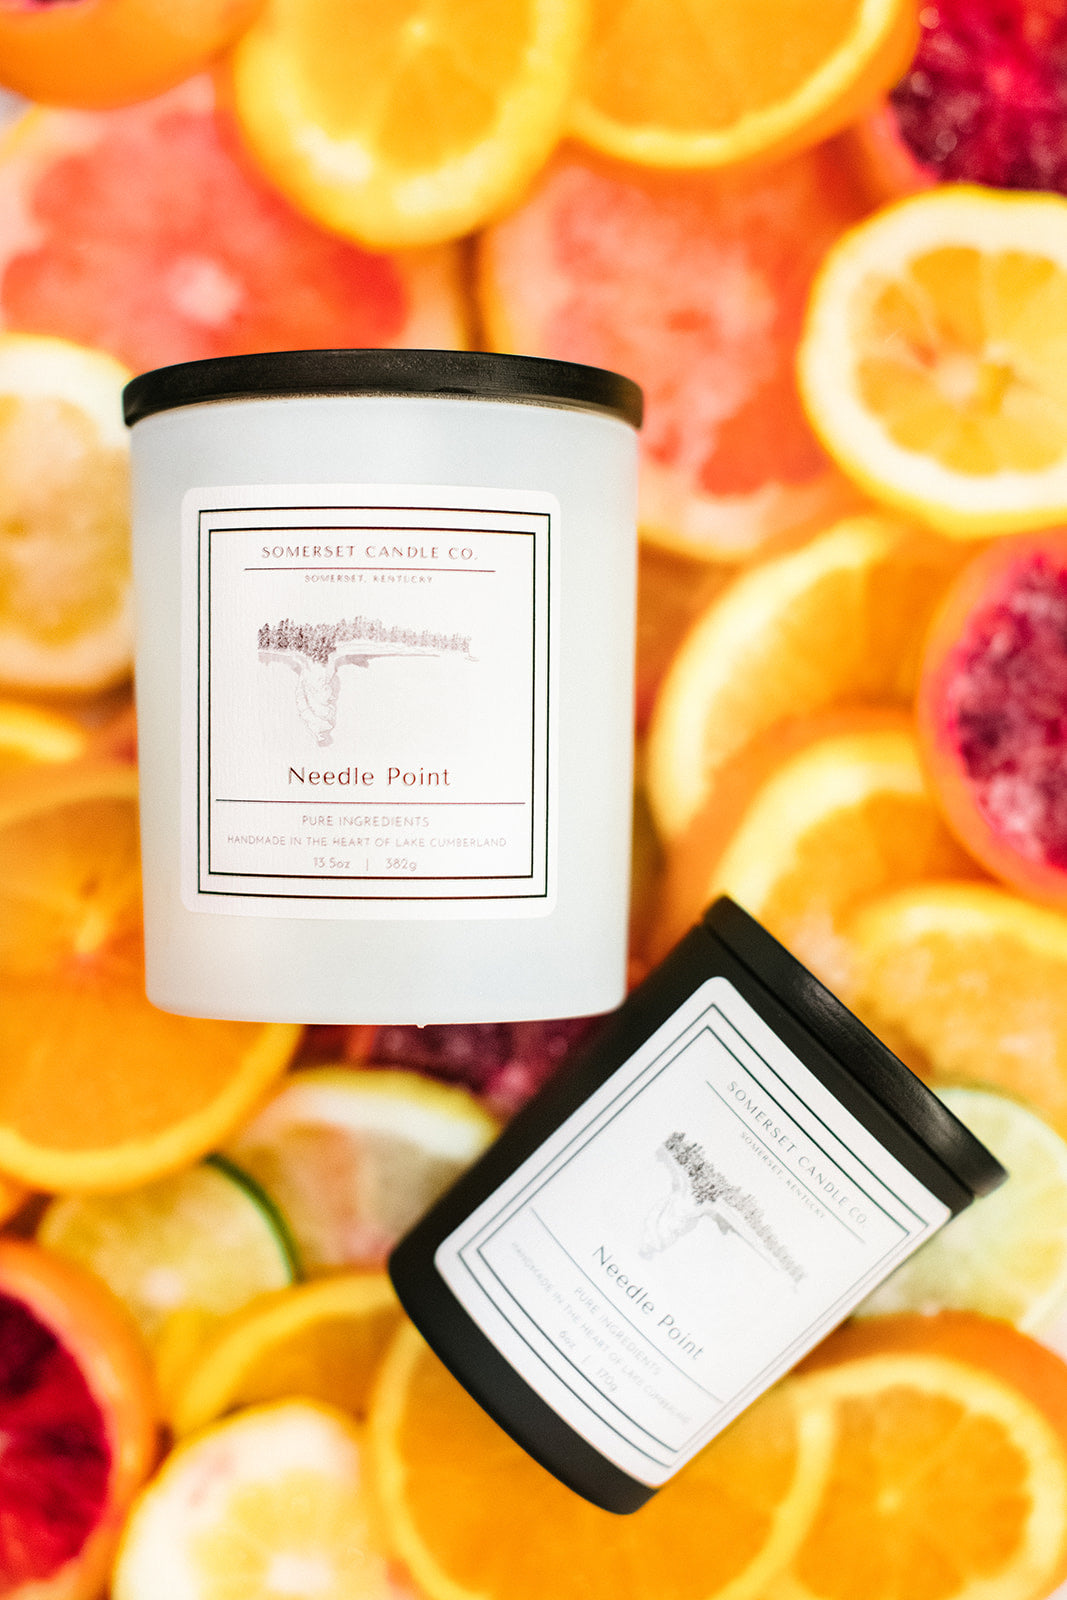 Needle Point – Somerset Candle Co.